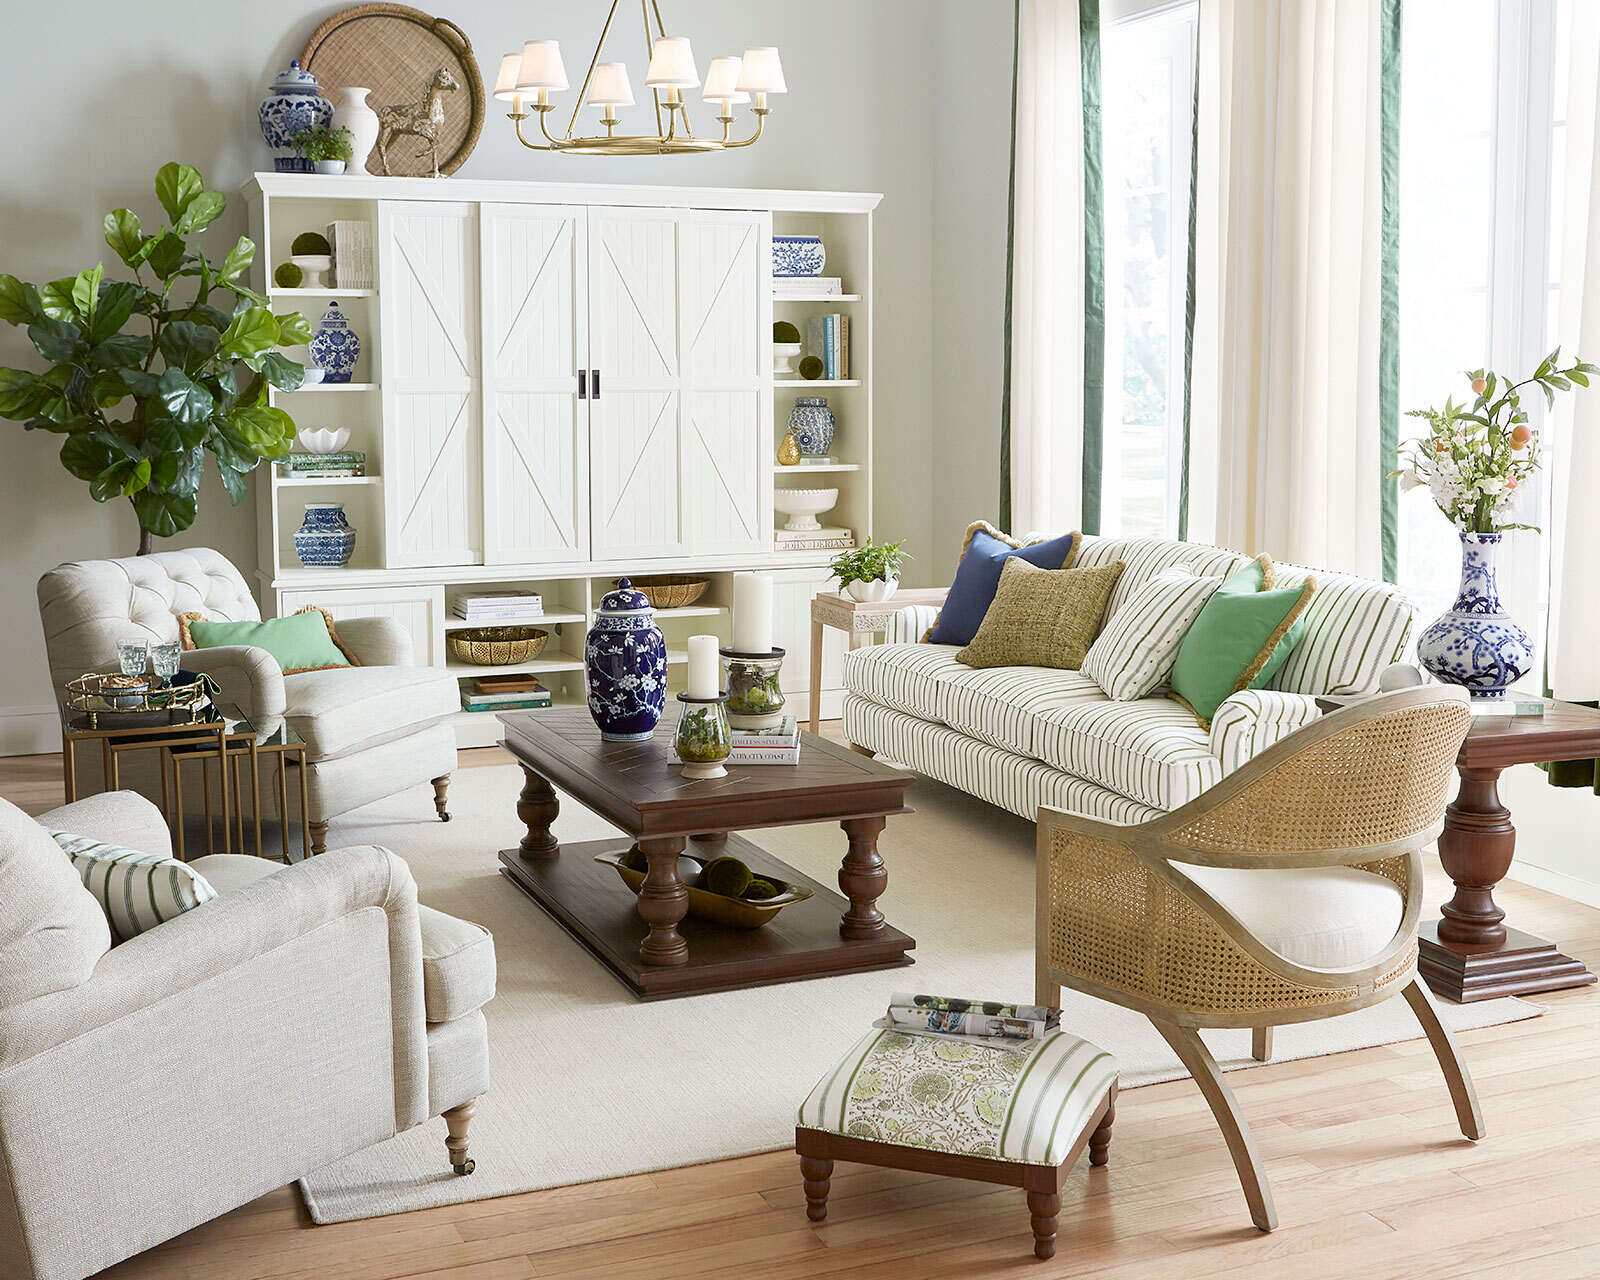 How To Add Color To Neutral Living Room